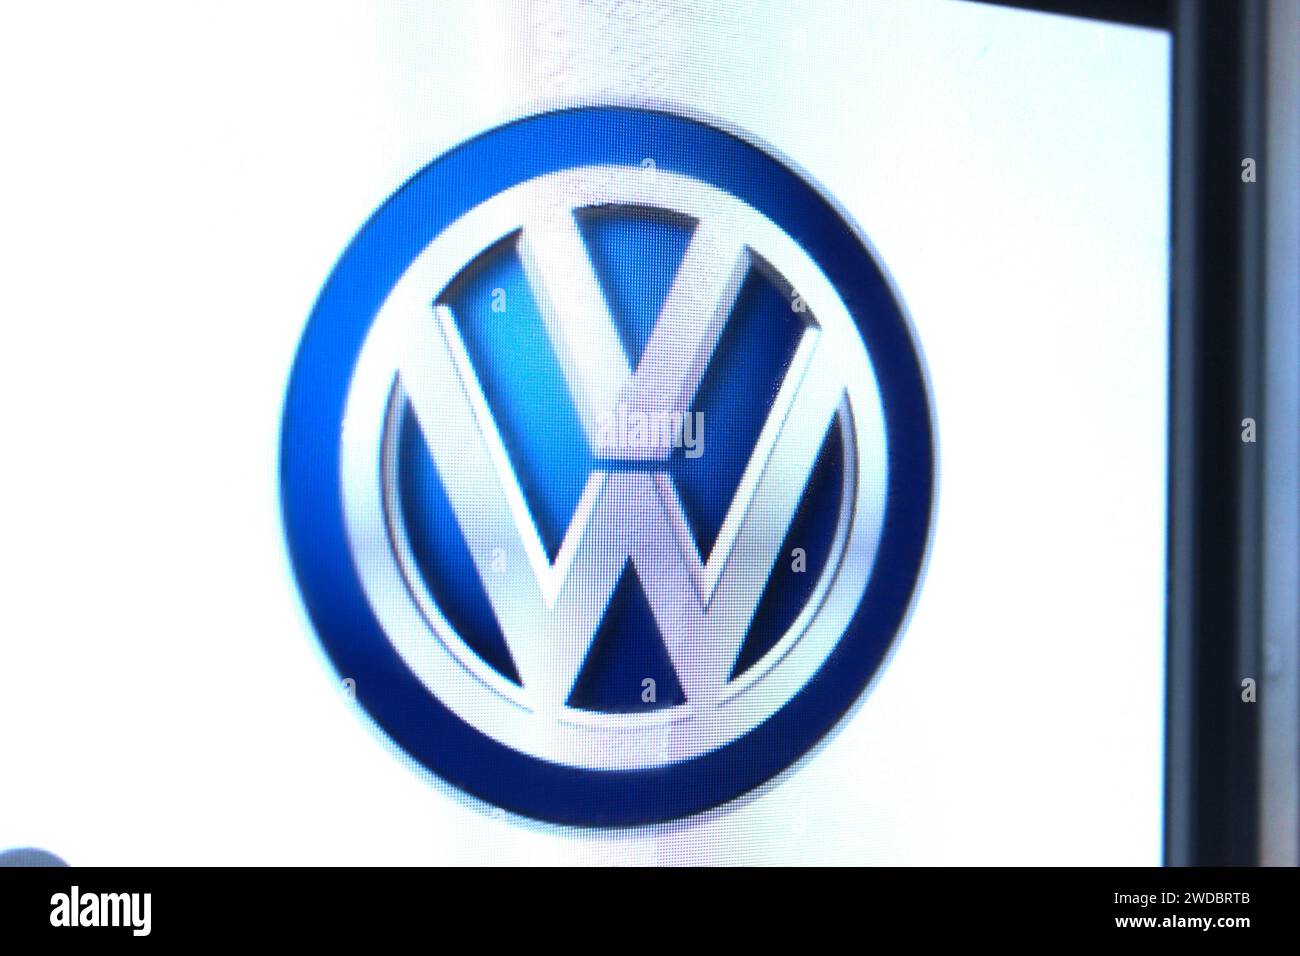 A photo of the Volkswagen car logo on a computer screen. Stock Photo